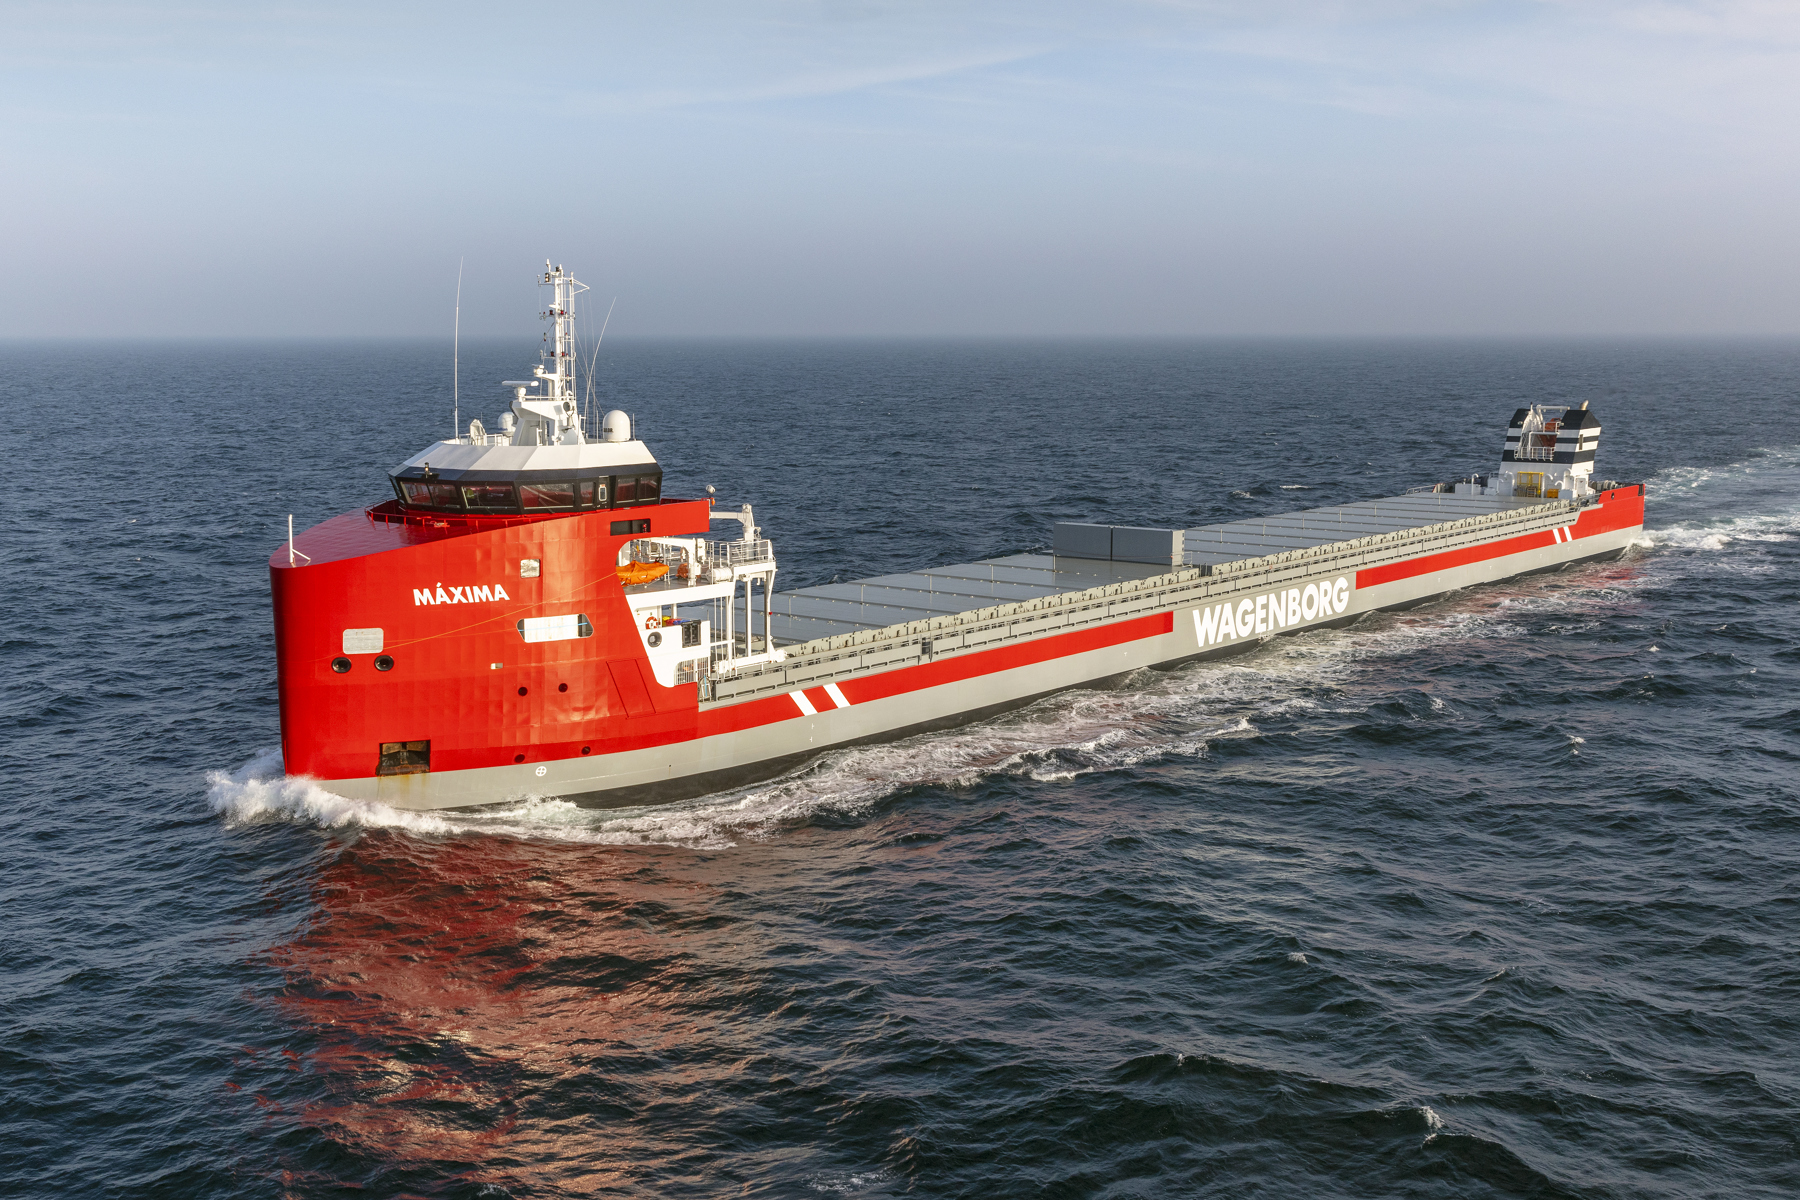 ABN Amro’s pursuit of a green portfolio is reflected in the financing of green ships, such as the m.v. Máxima, the latest addition to the Wagenborg fleet.